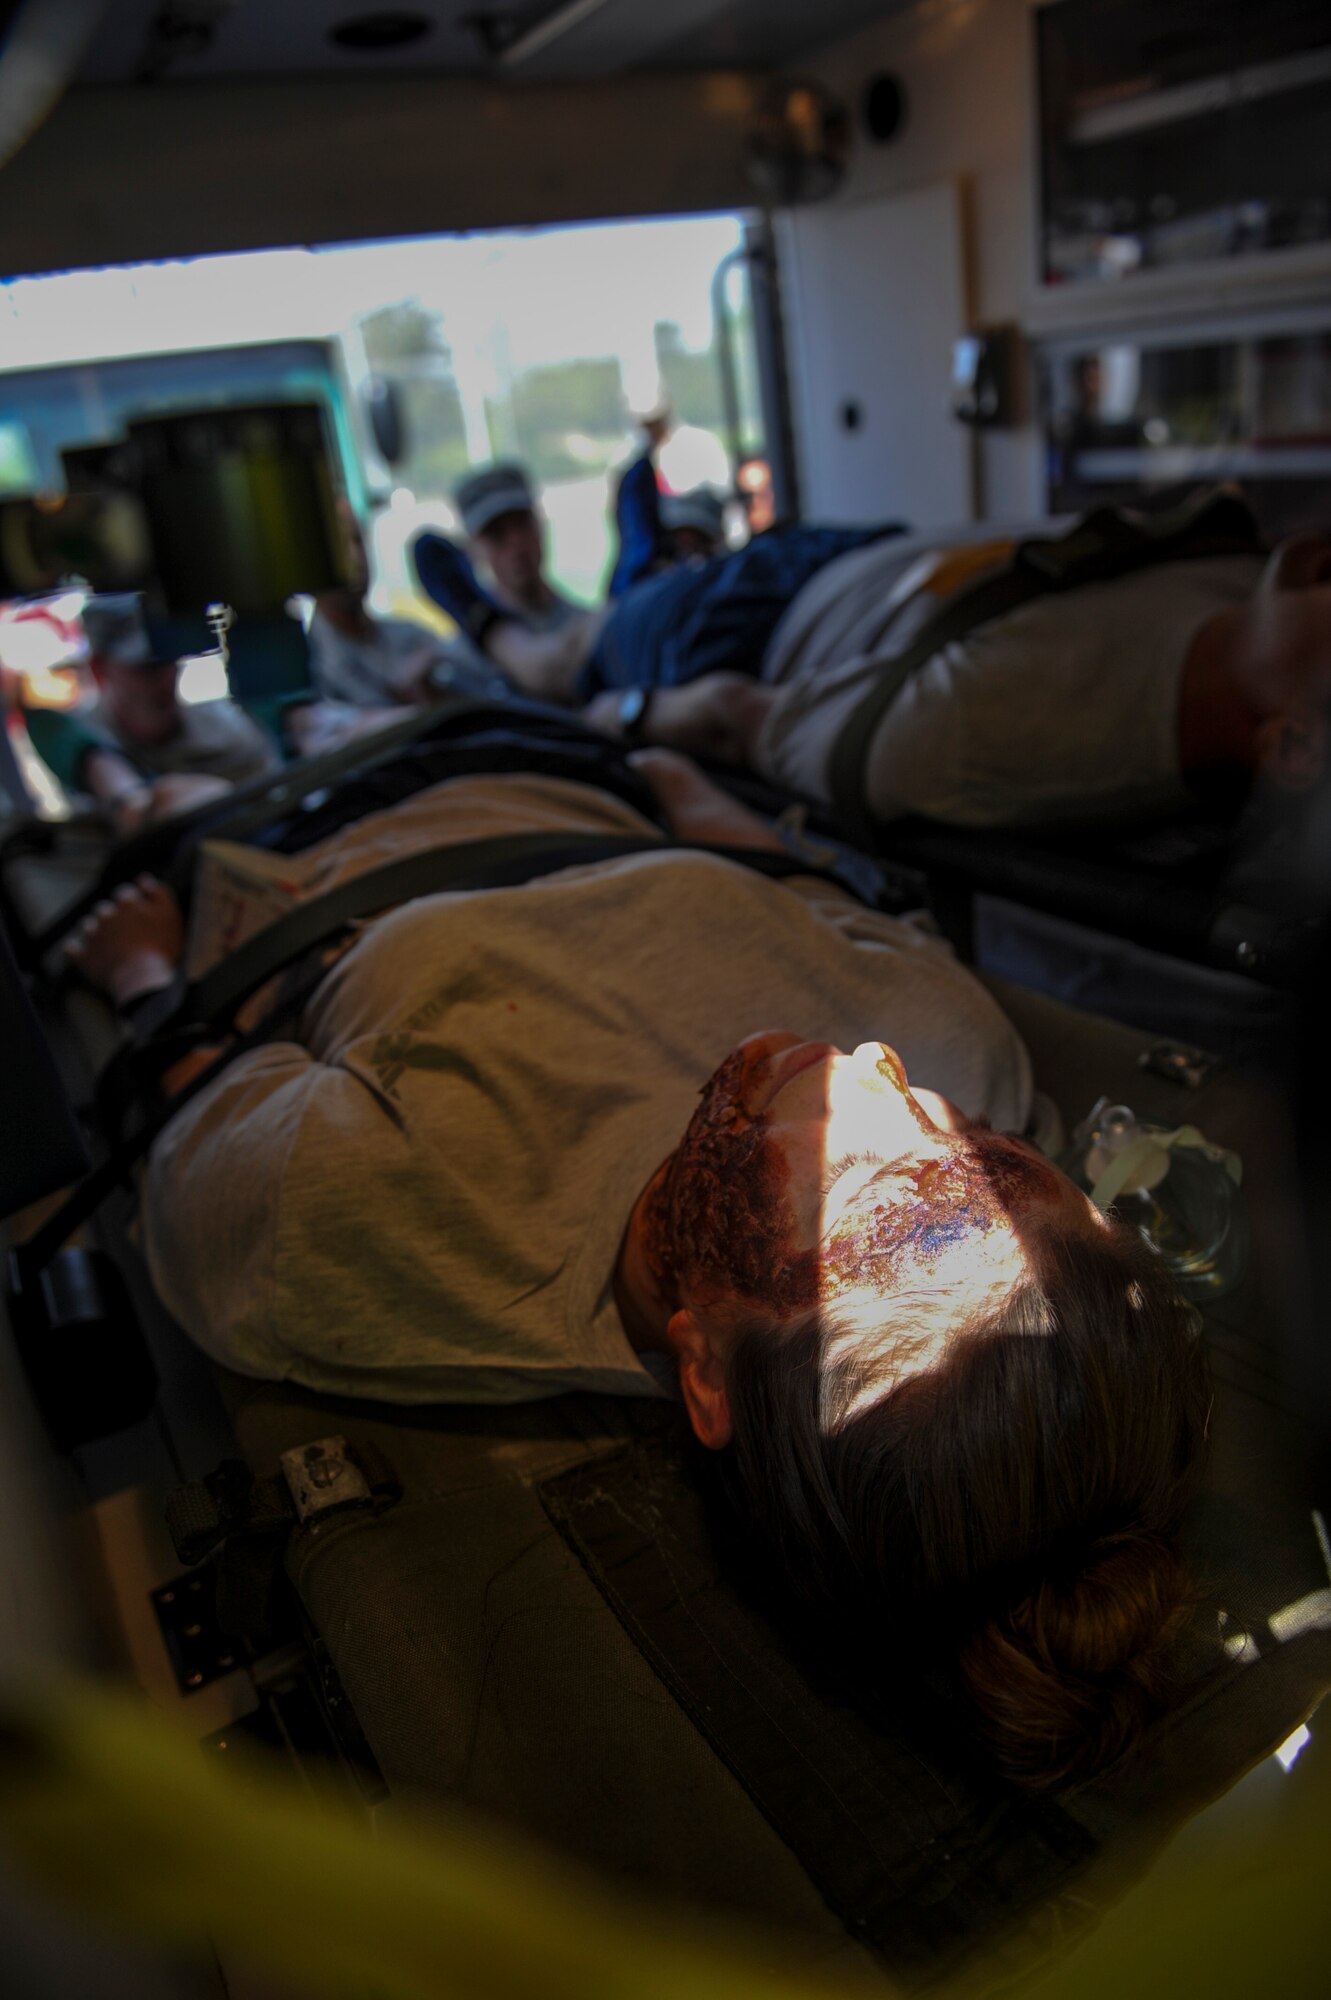 United States Air Force Senior Airman Amber Lucas, 8th Medical Operations Squadron dental technician, lies on a stretcher inside of an ambulance after receiving care during a mass casualty exercise at Kunsan Air Base, Republic of Korea, April 19, 2017. U.S. and ROK airmen conducted the training to evaluate their ability to communicate and operate through a MASCAL situation. (U.S. Air Force photo by Senior Airman Colville McFee/Released)